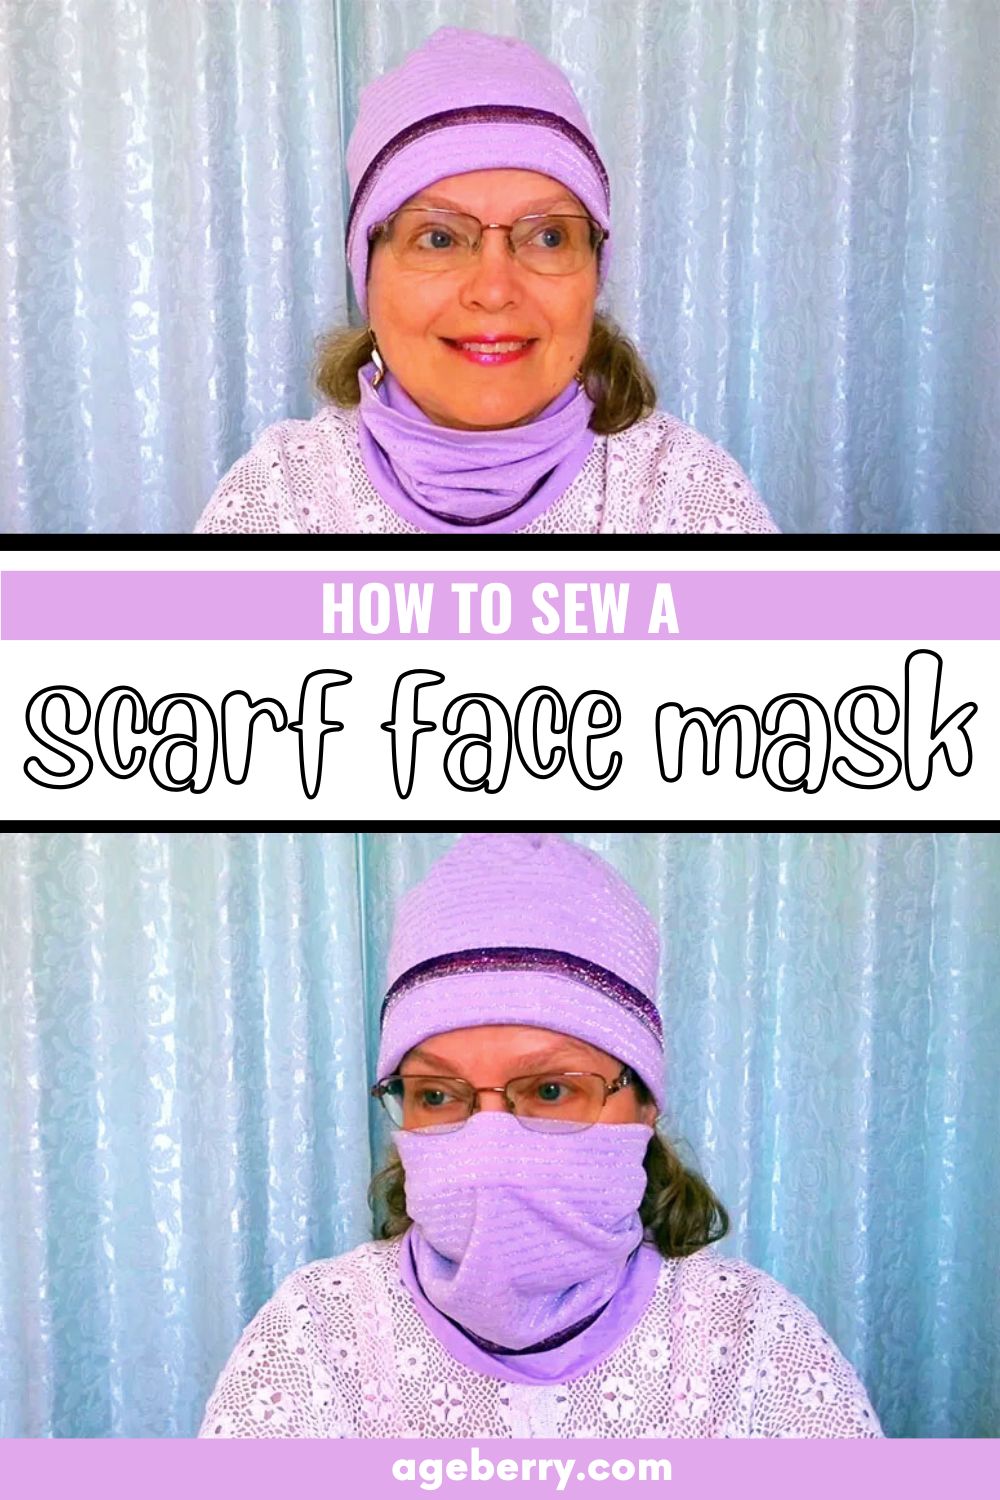 How to sew a scarf face mask - a video sewing tutorial